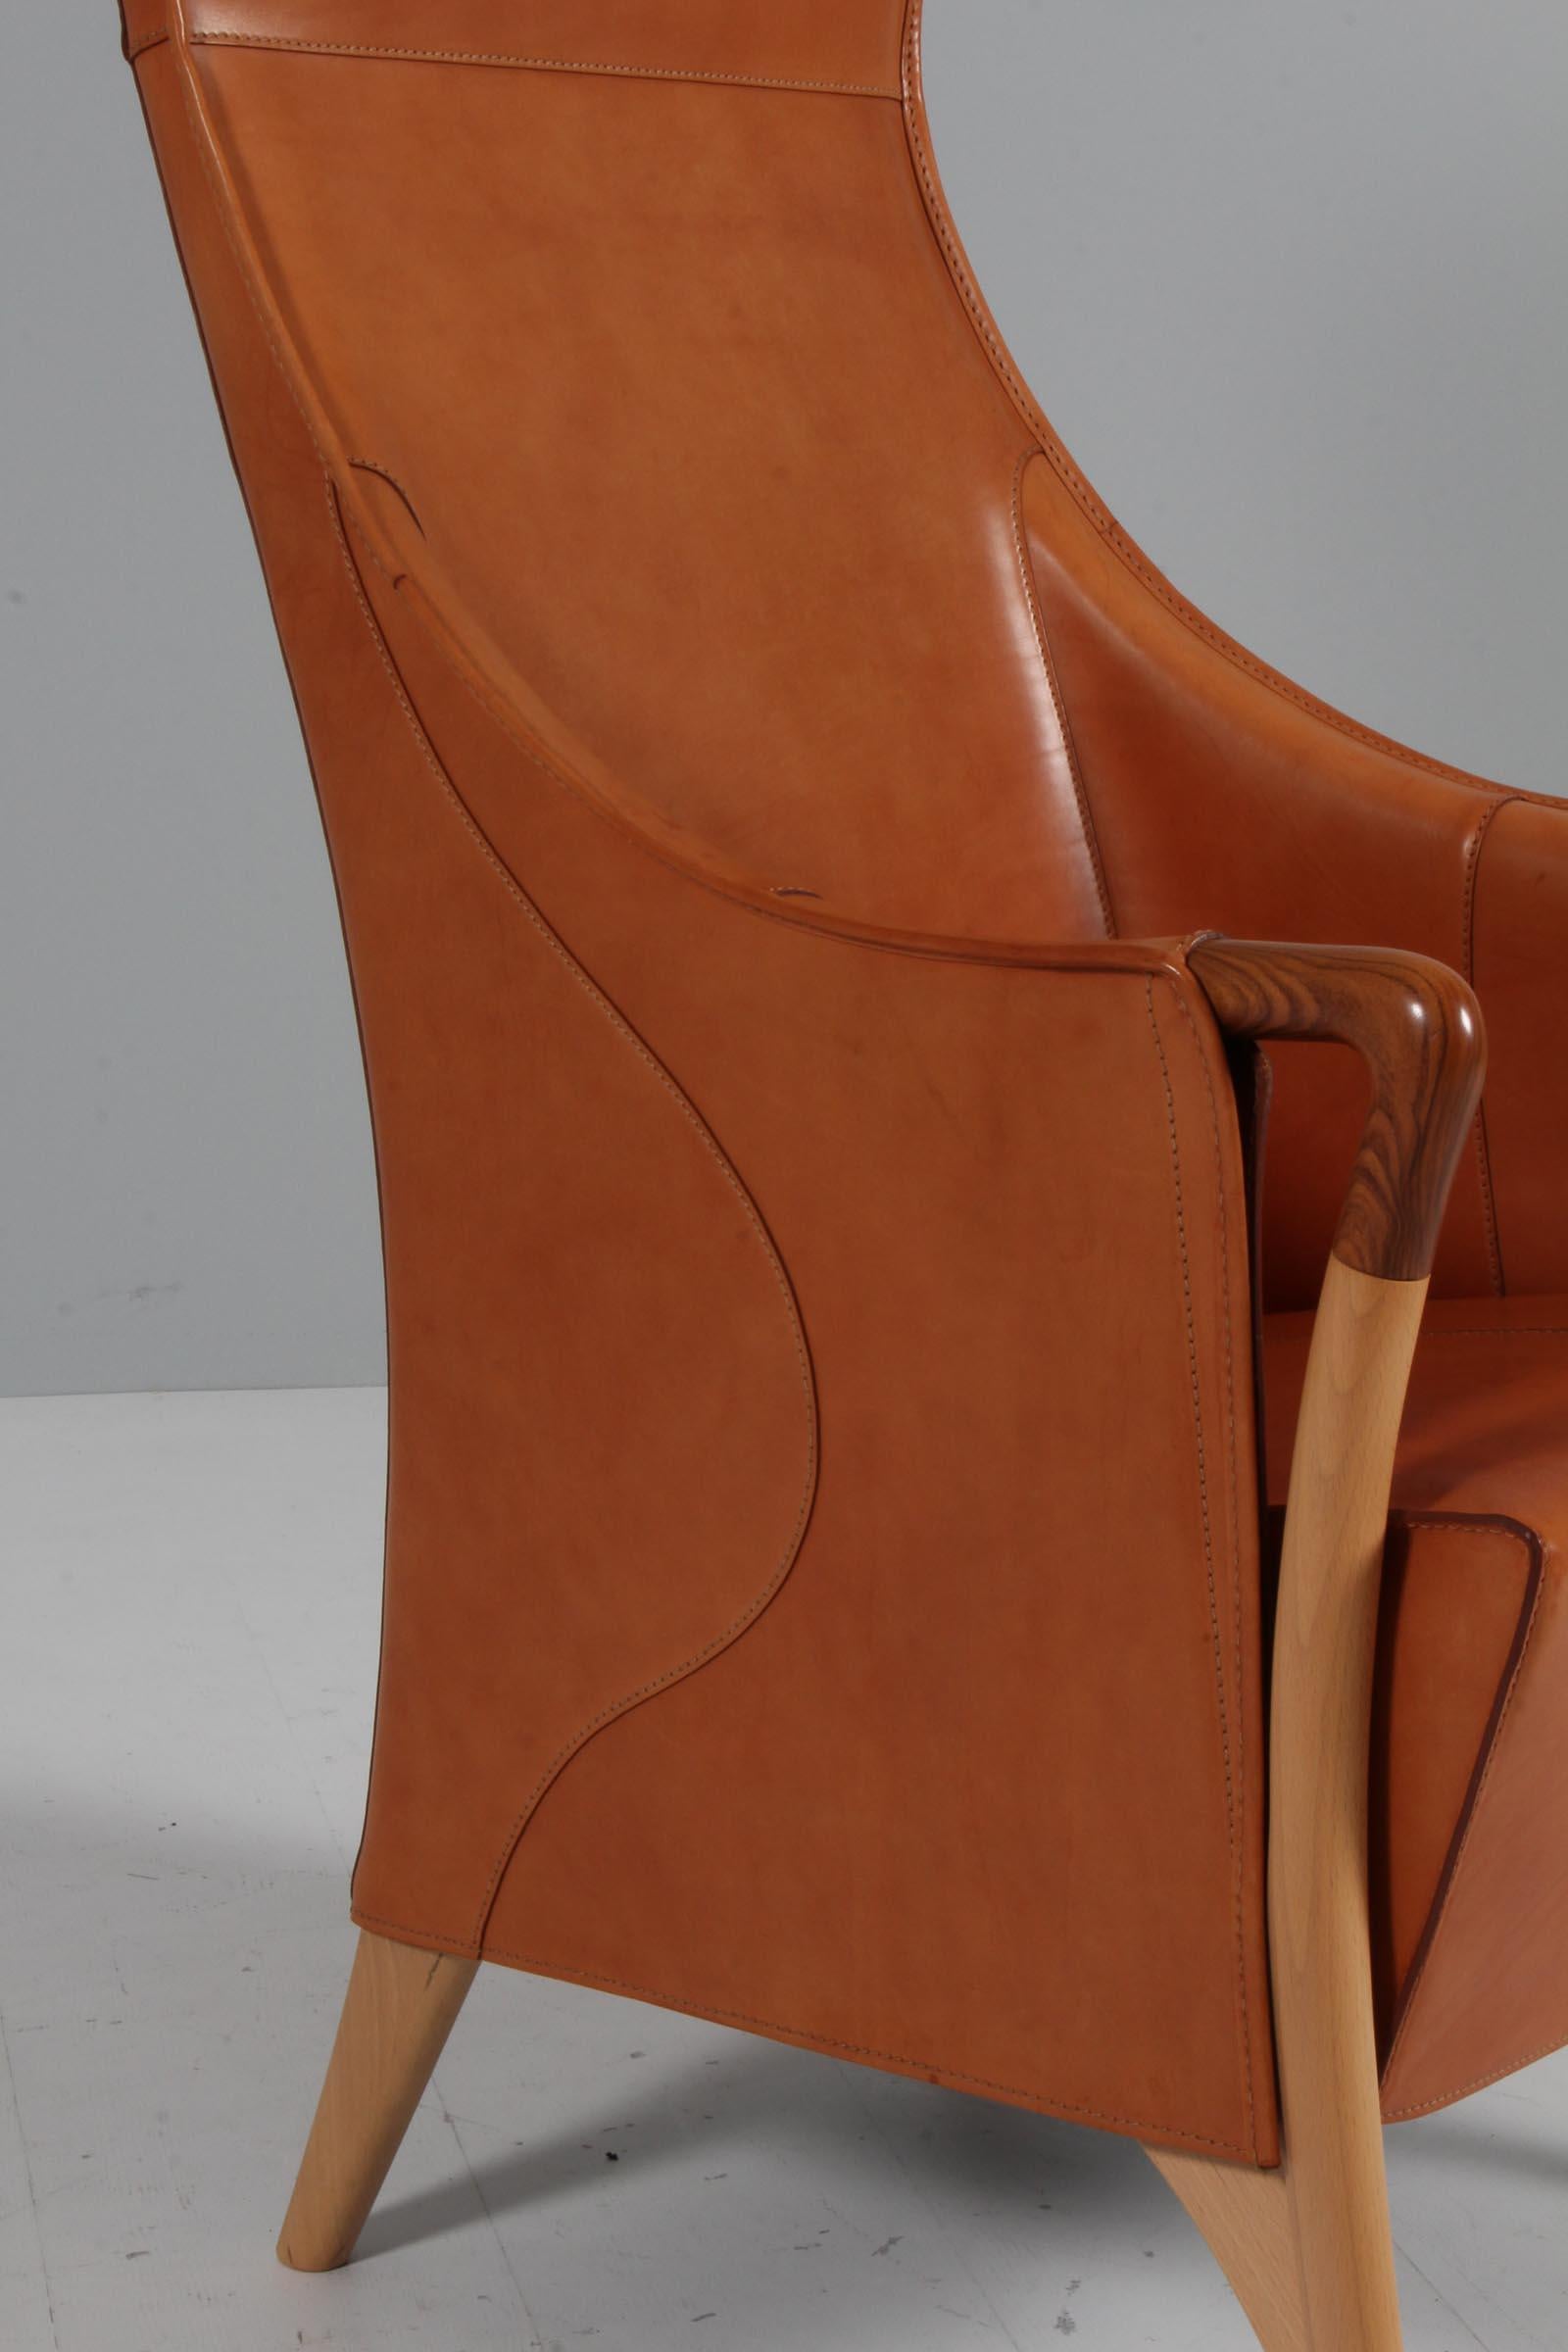 Leather Umberto Asnago for Giorgetti lounge chair in saddle leather For Sale